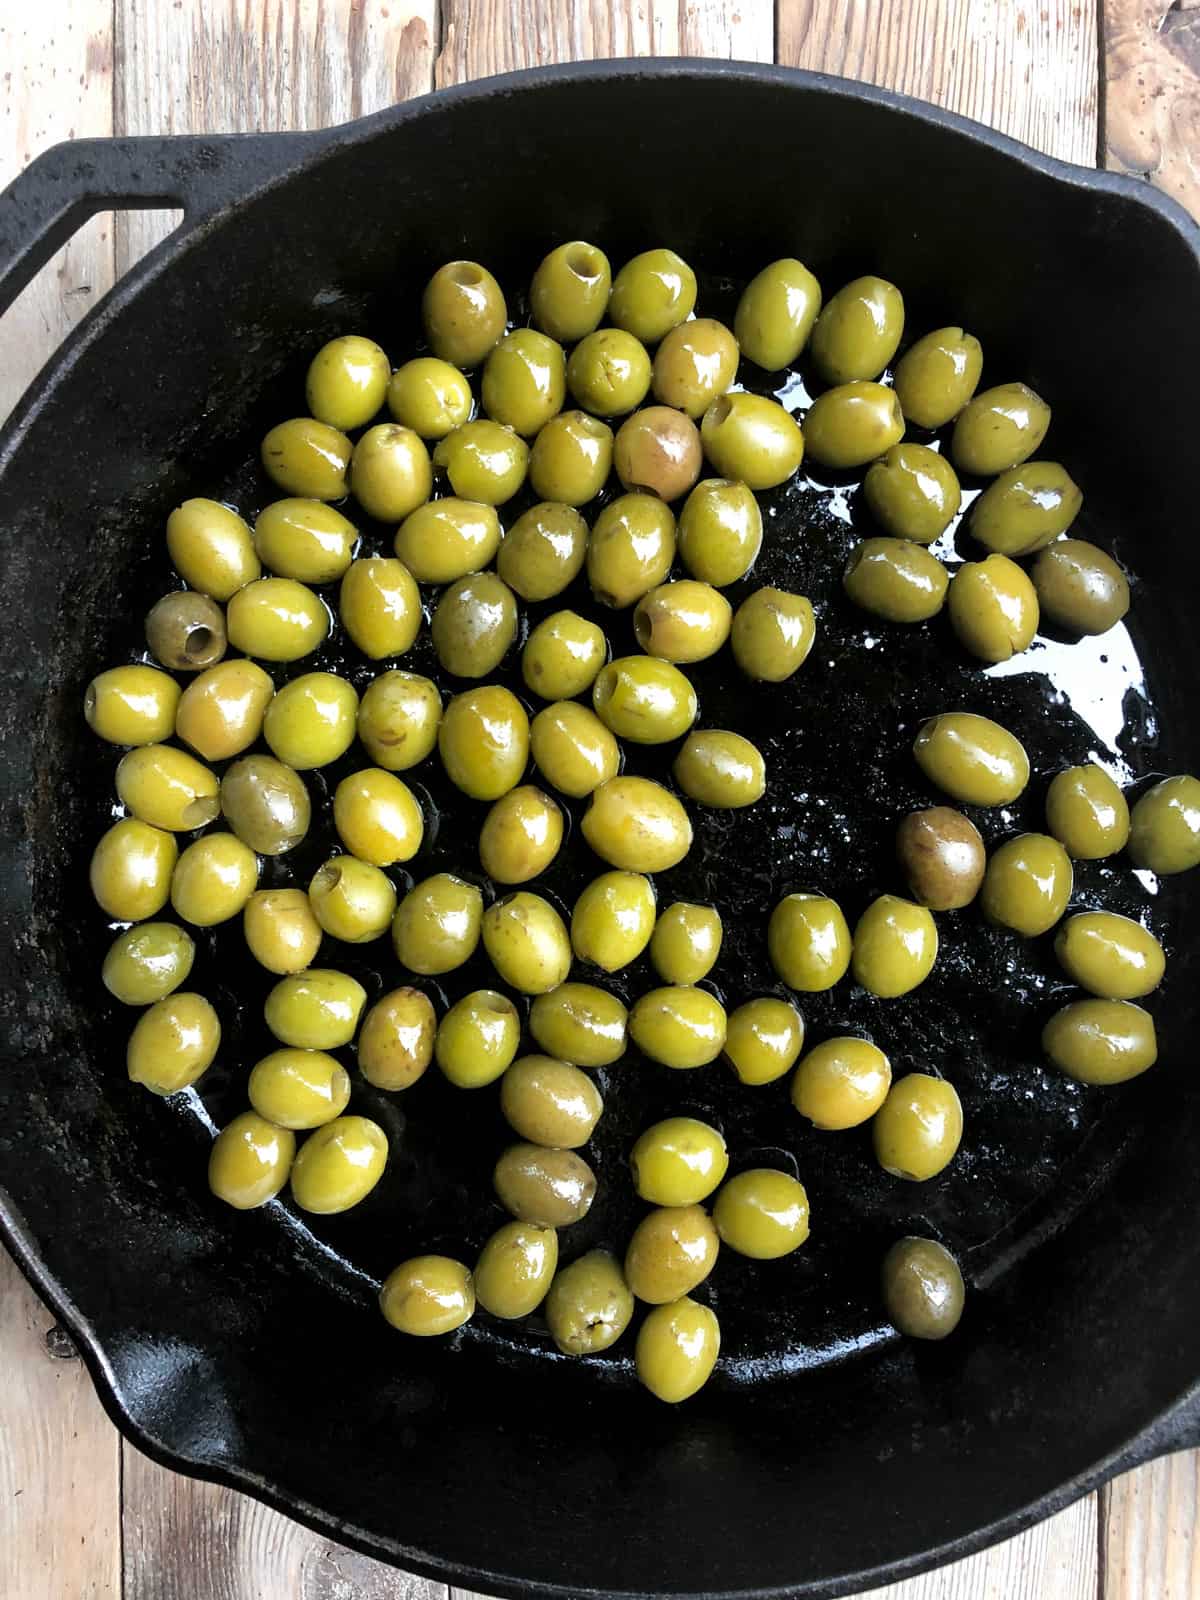 Pour in the drained olives.